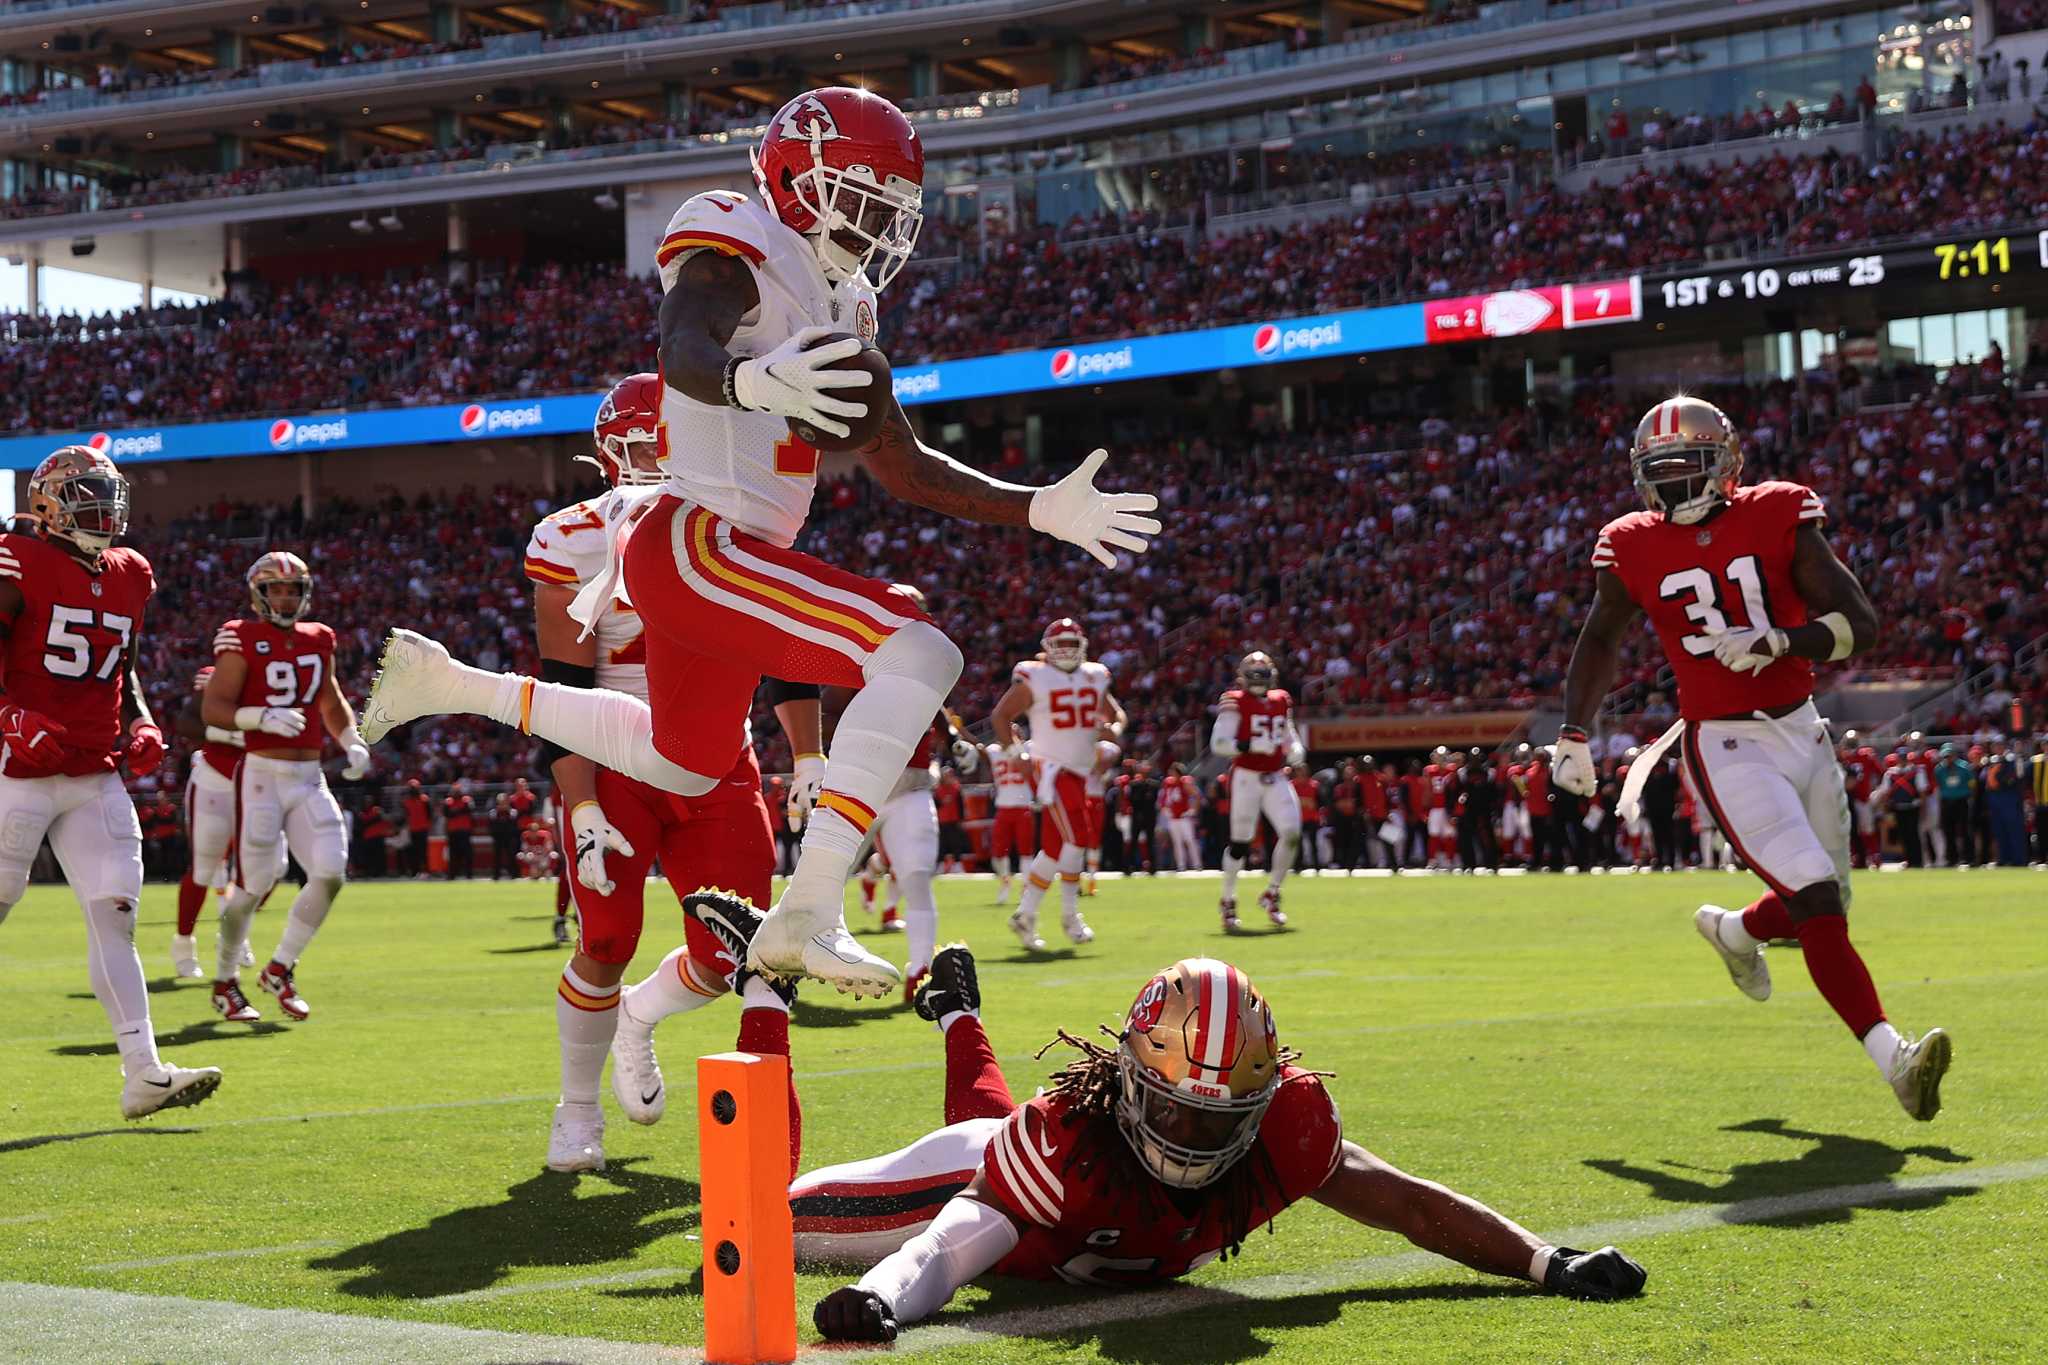 49ers-Chiefs: Hardman romps to 3 TDs as Chiefs rout Niners